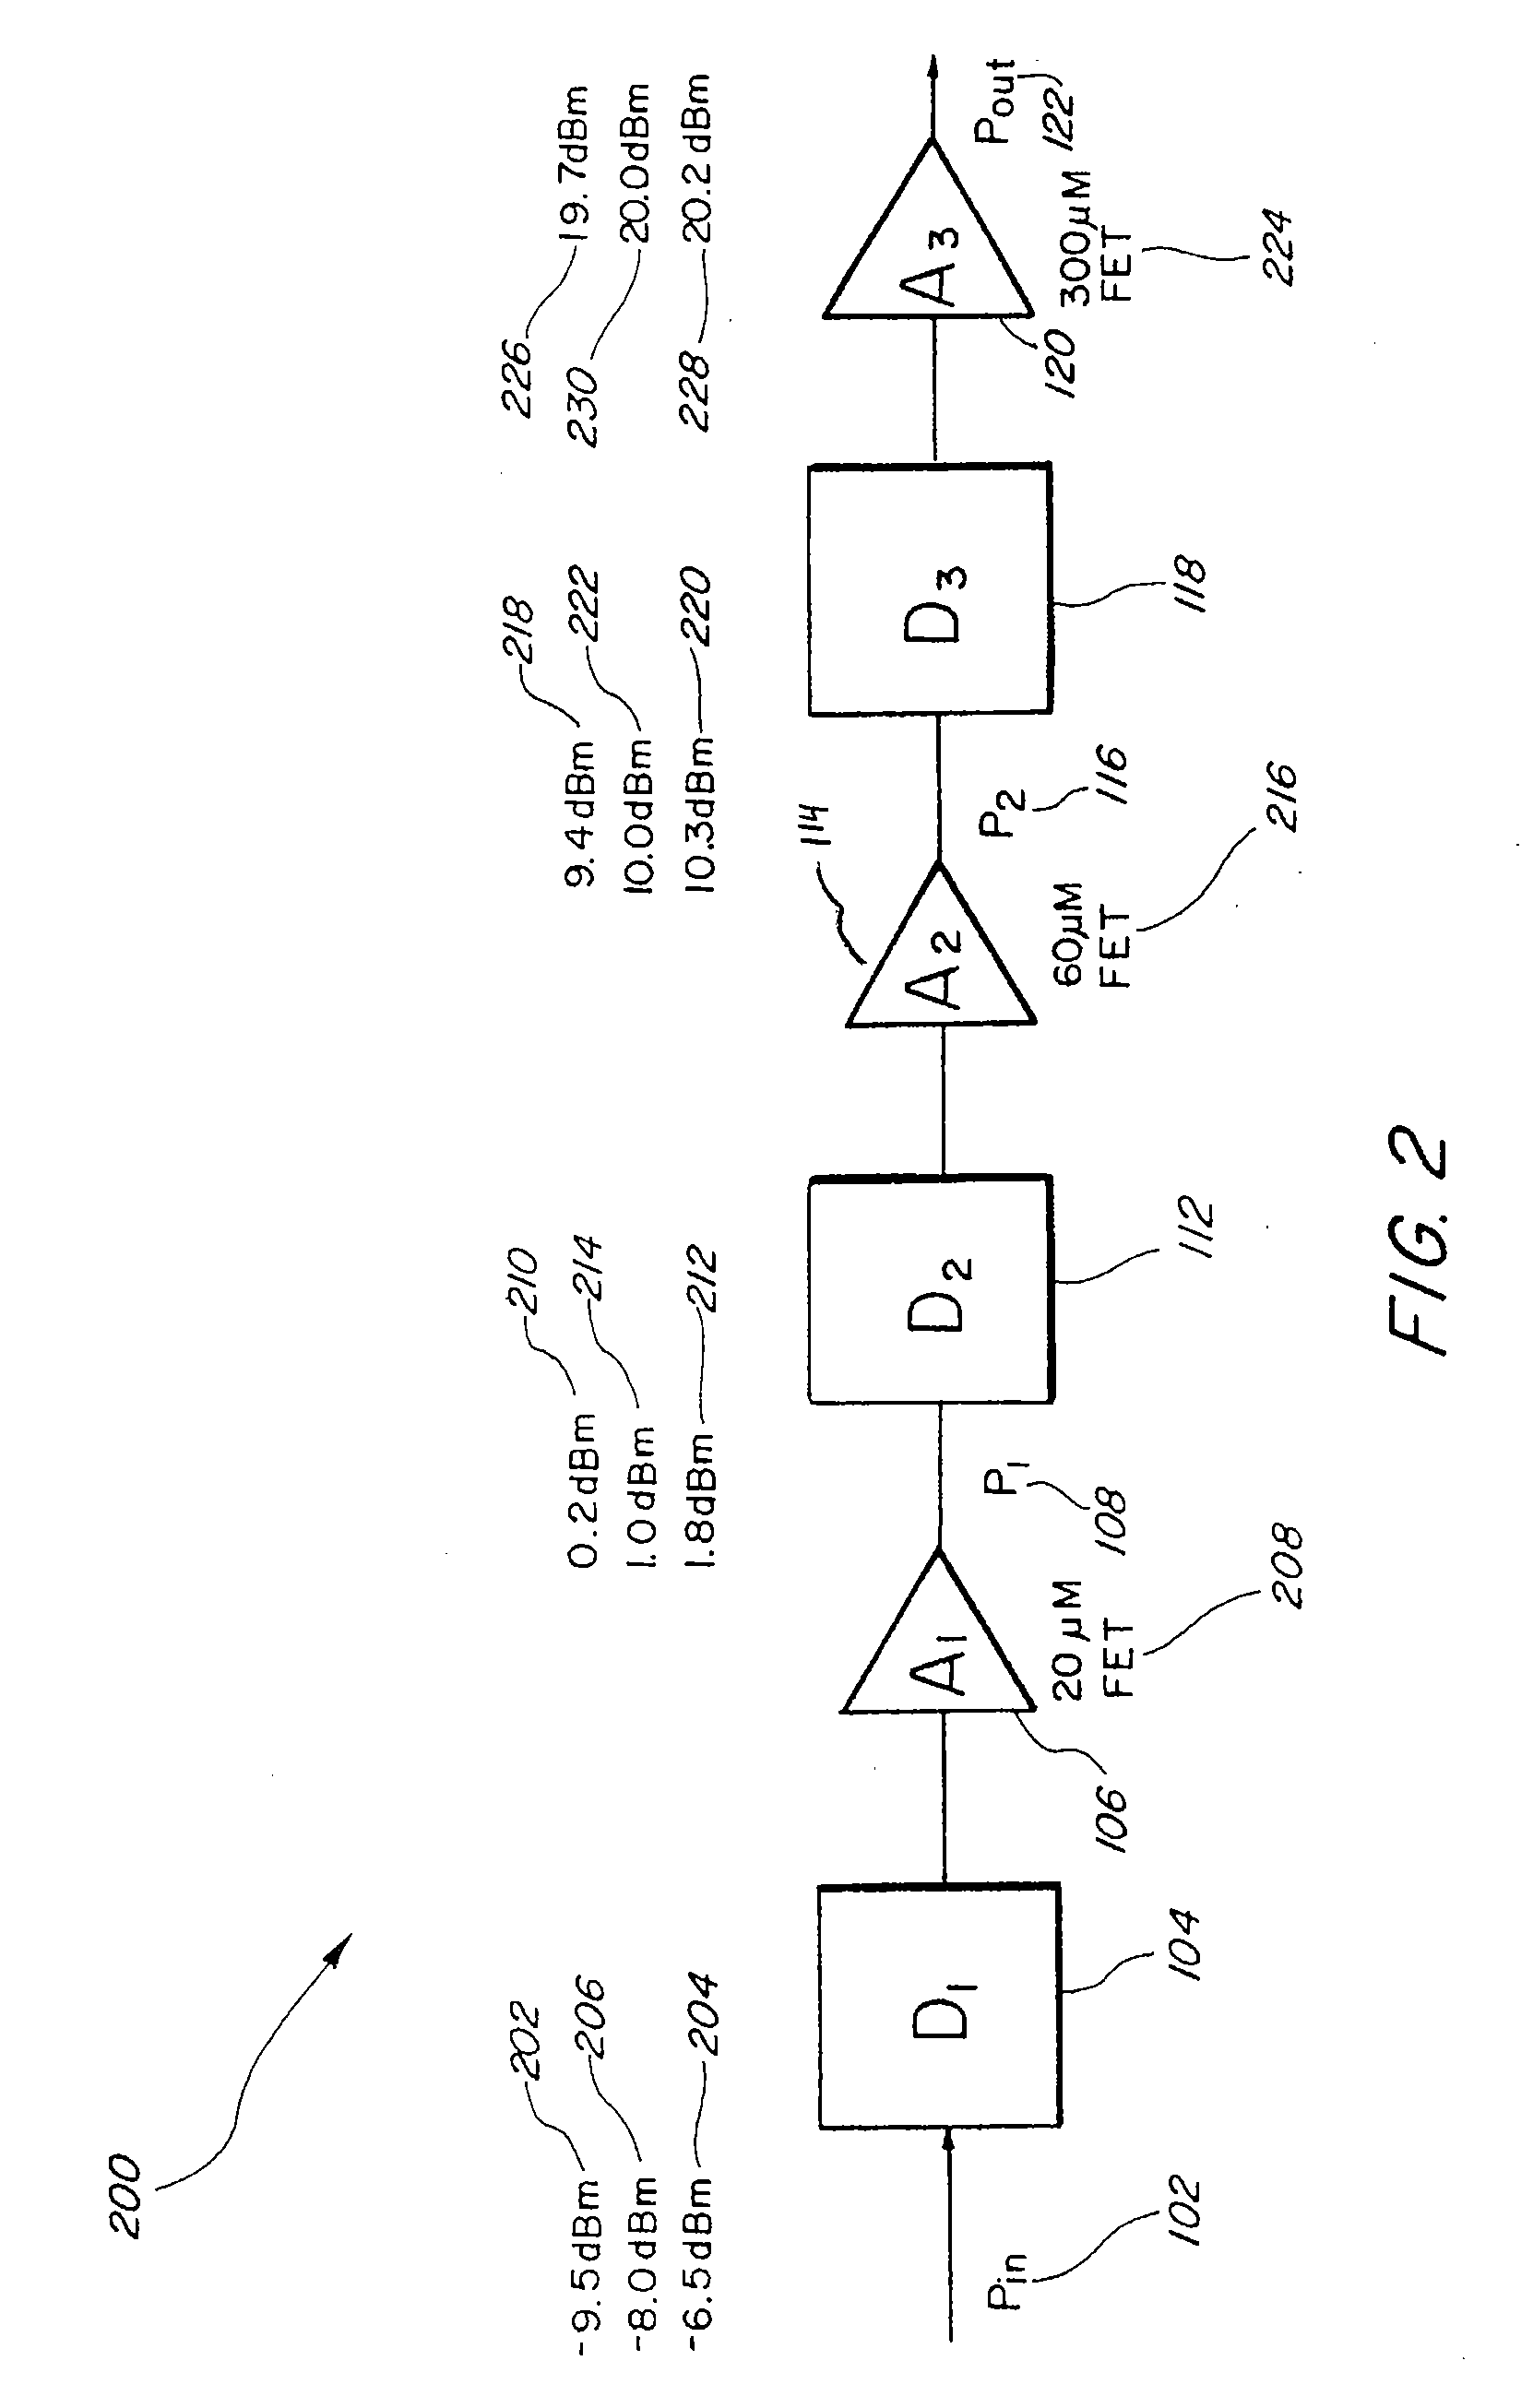 Power efficient multistage amplifier and design method